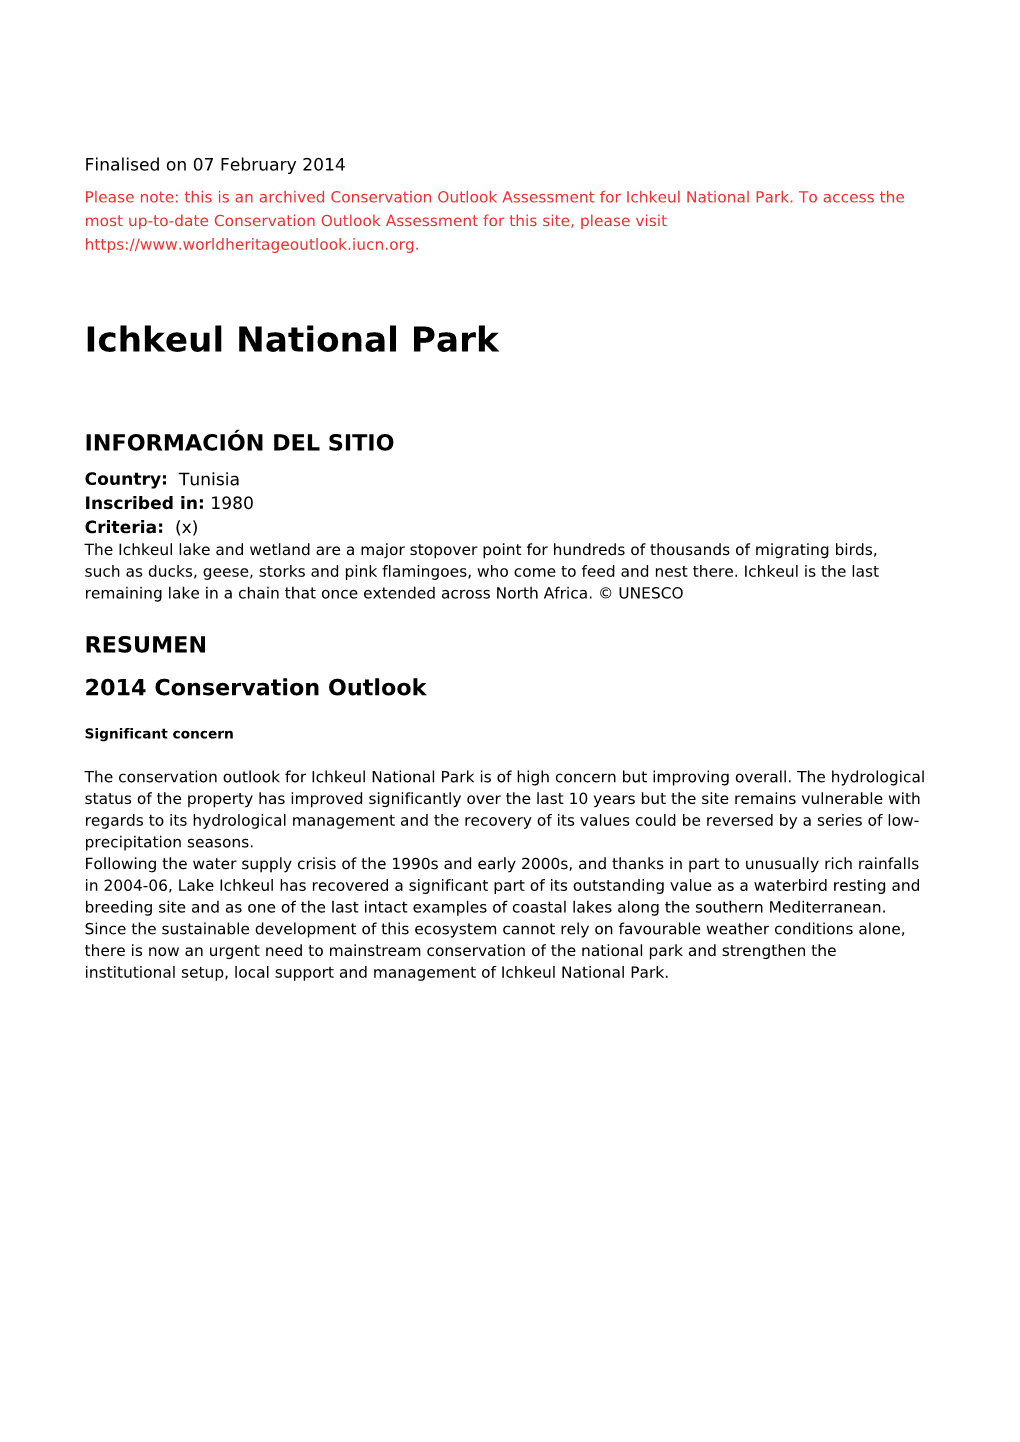 Ichkeul National Park - 2014 Conservation Outlook Assessment (Archived)